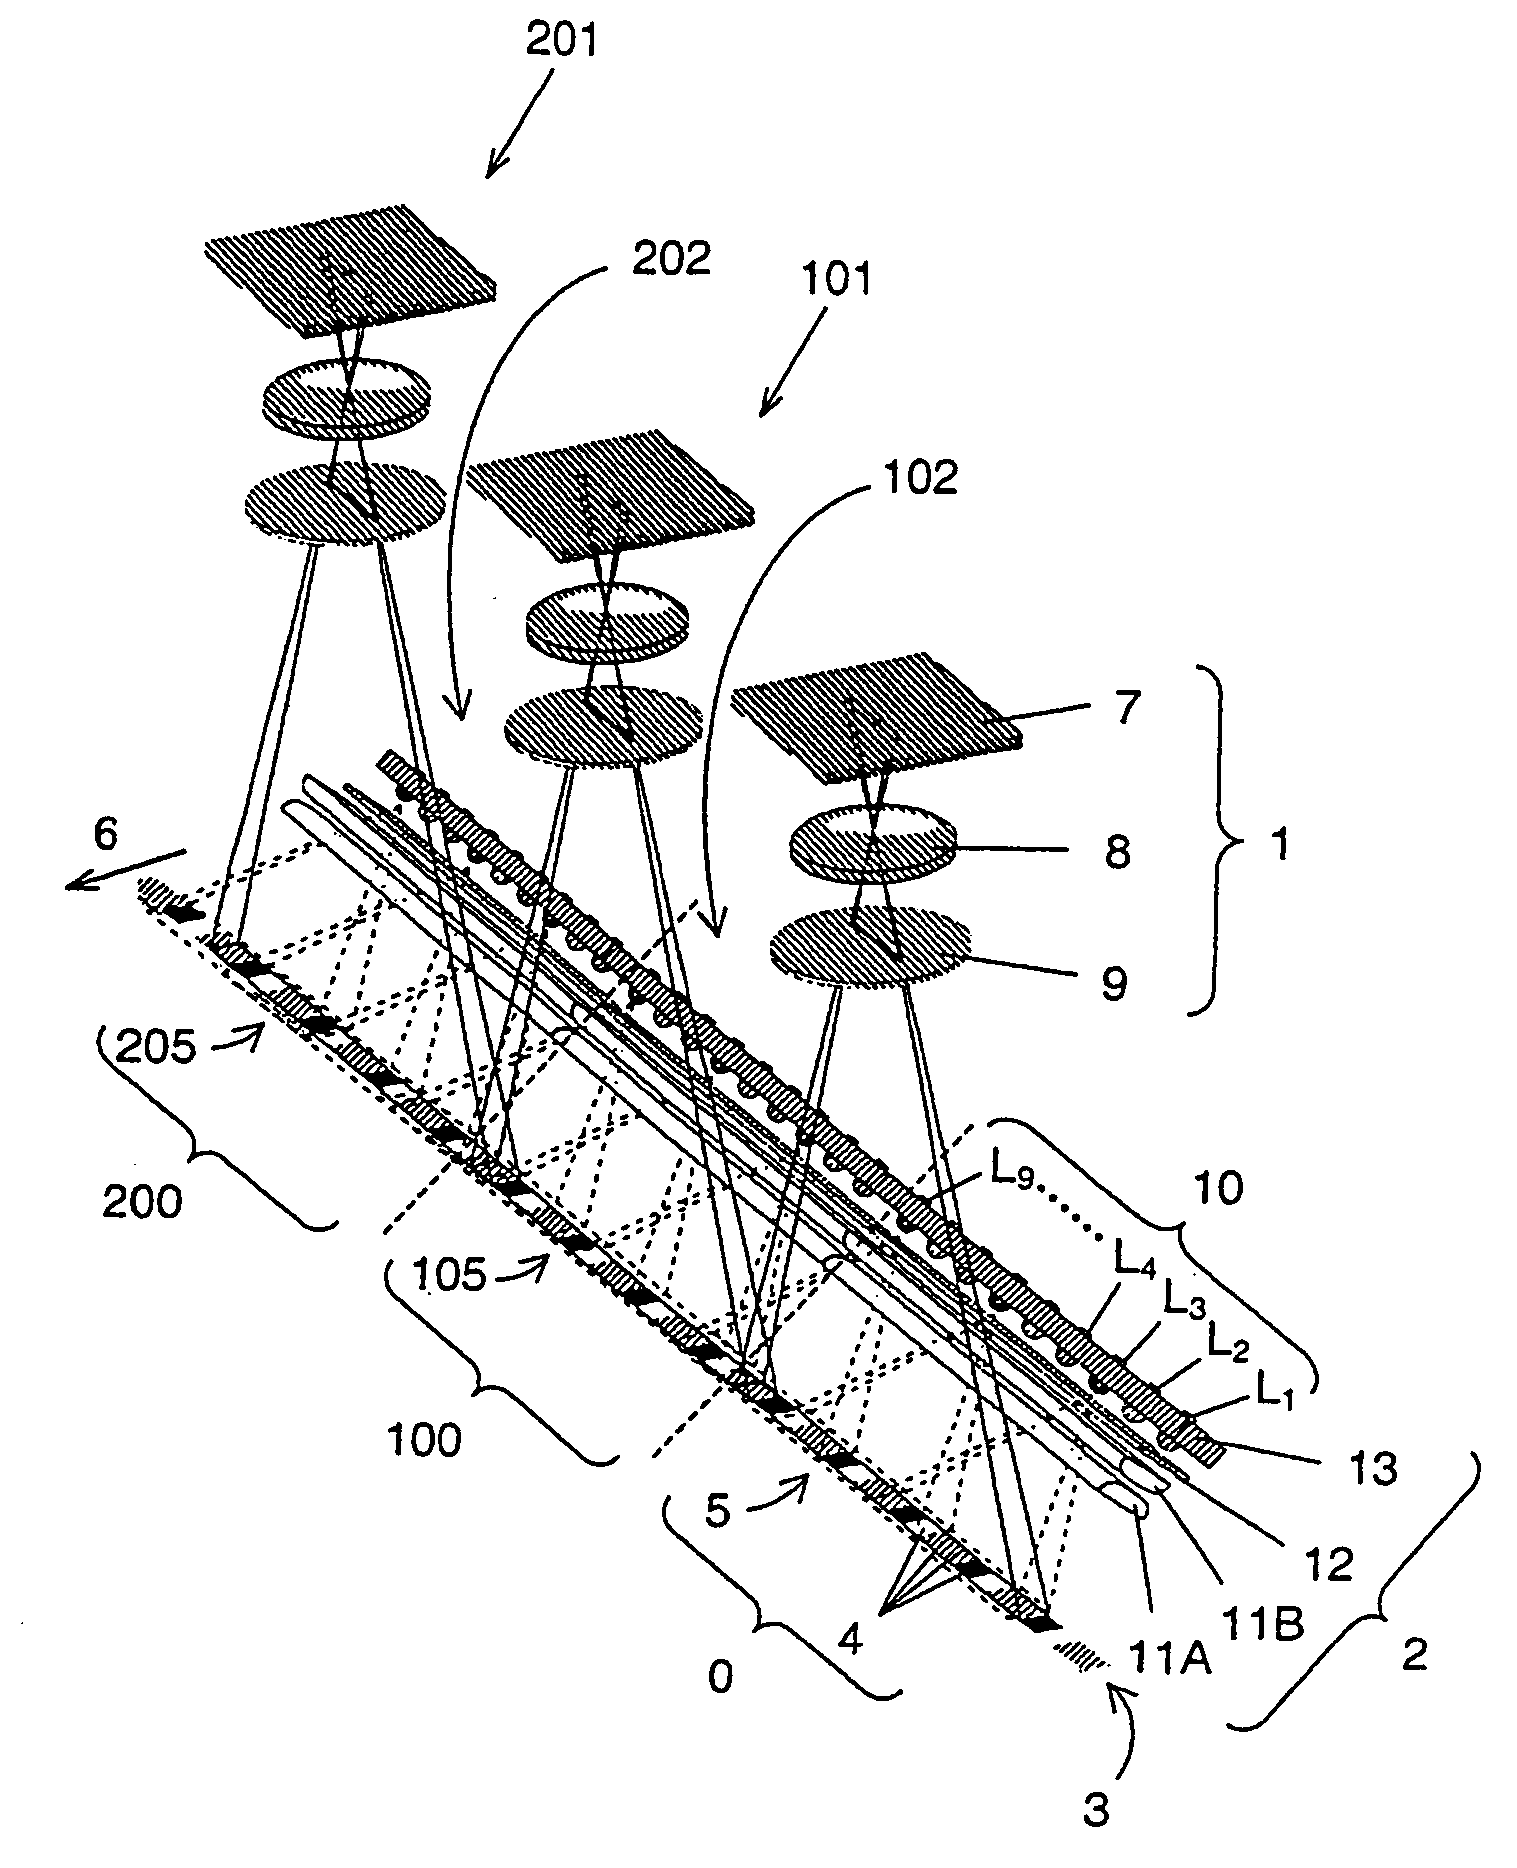 Apparatus for acquiring an image of a predetermined extract of a moving printed product